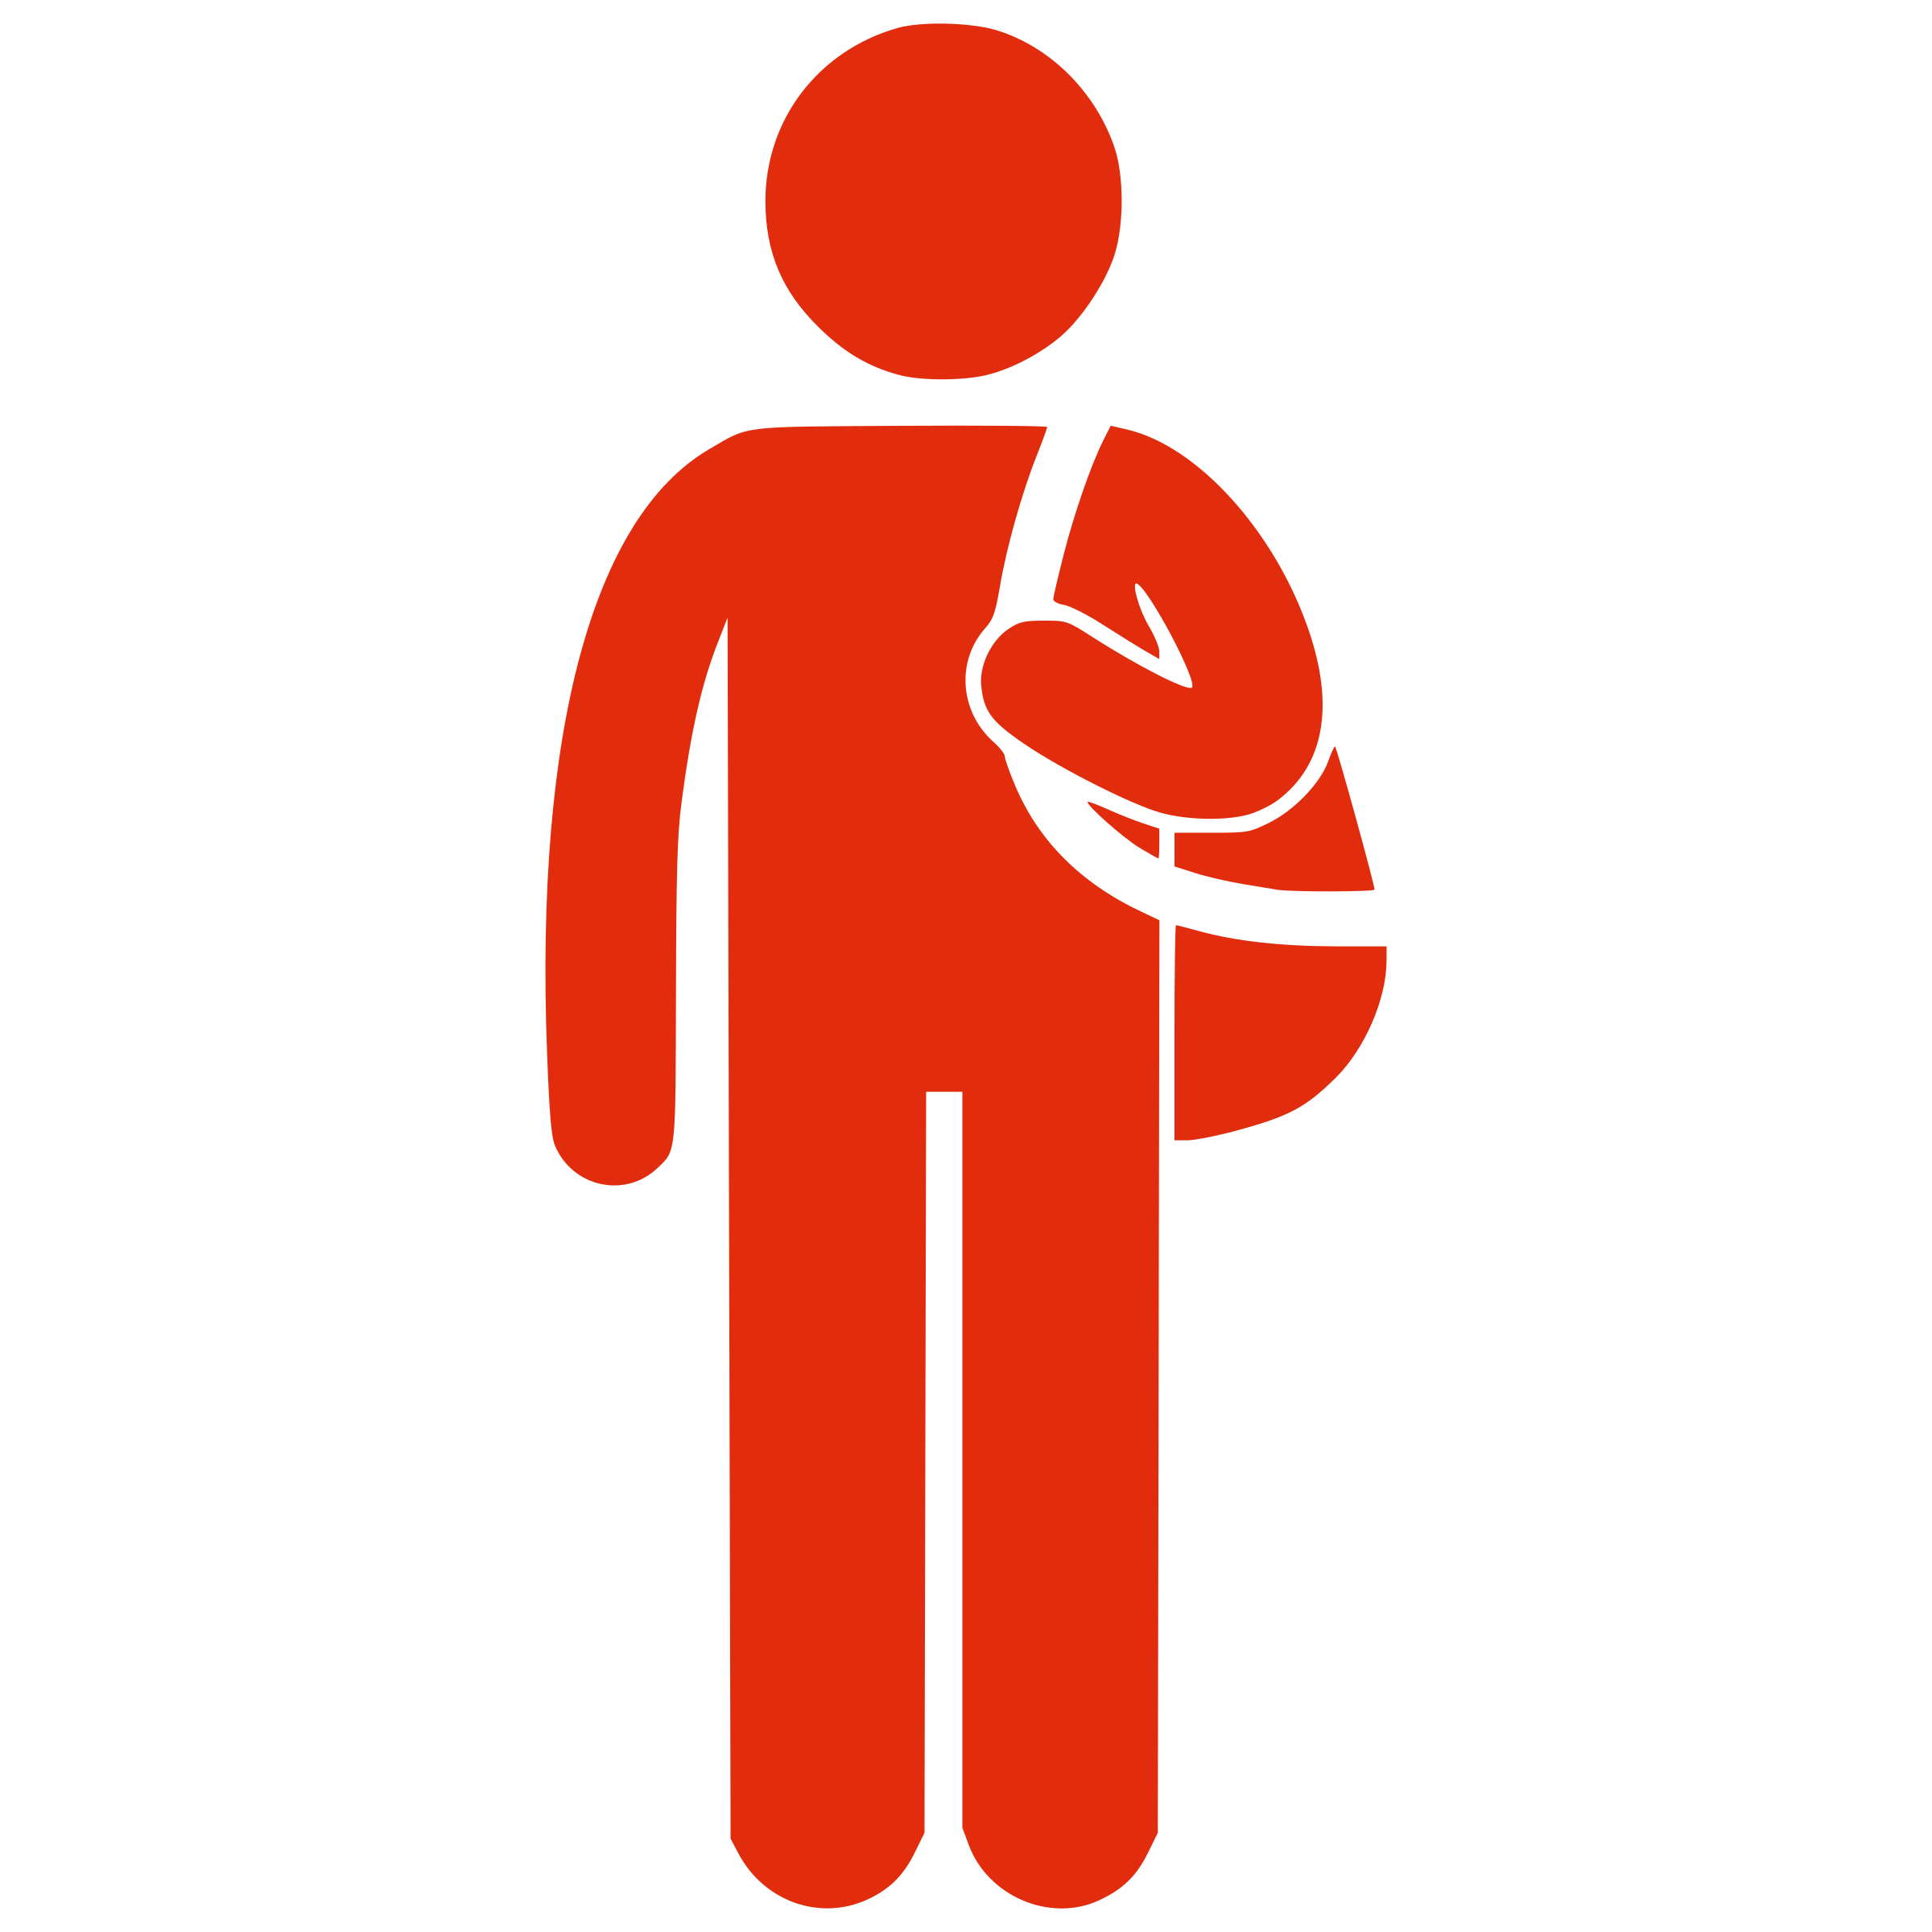 Silhouette man with bag. Clipart walking person symbol